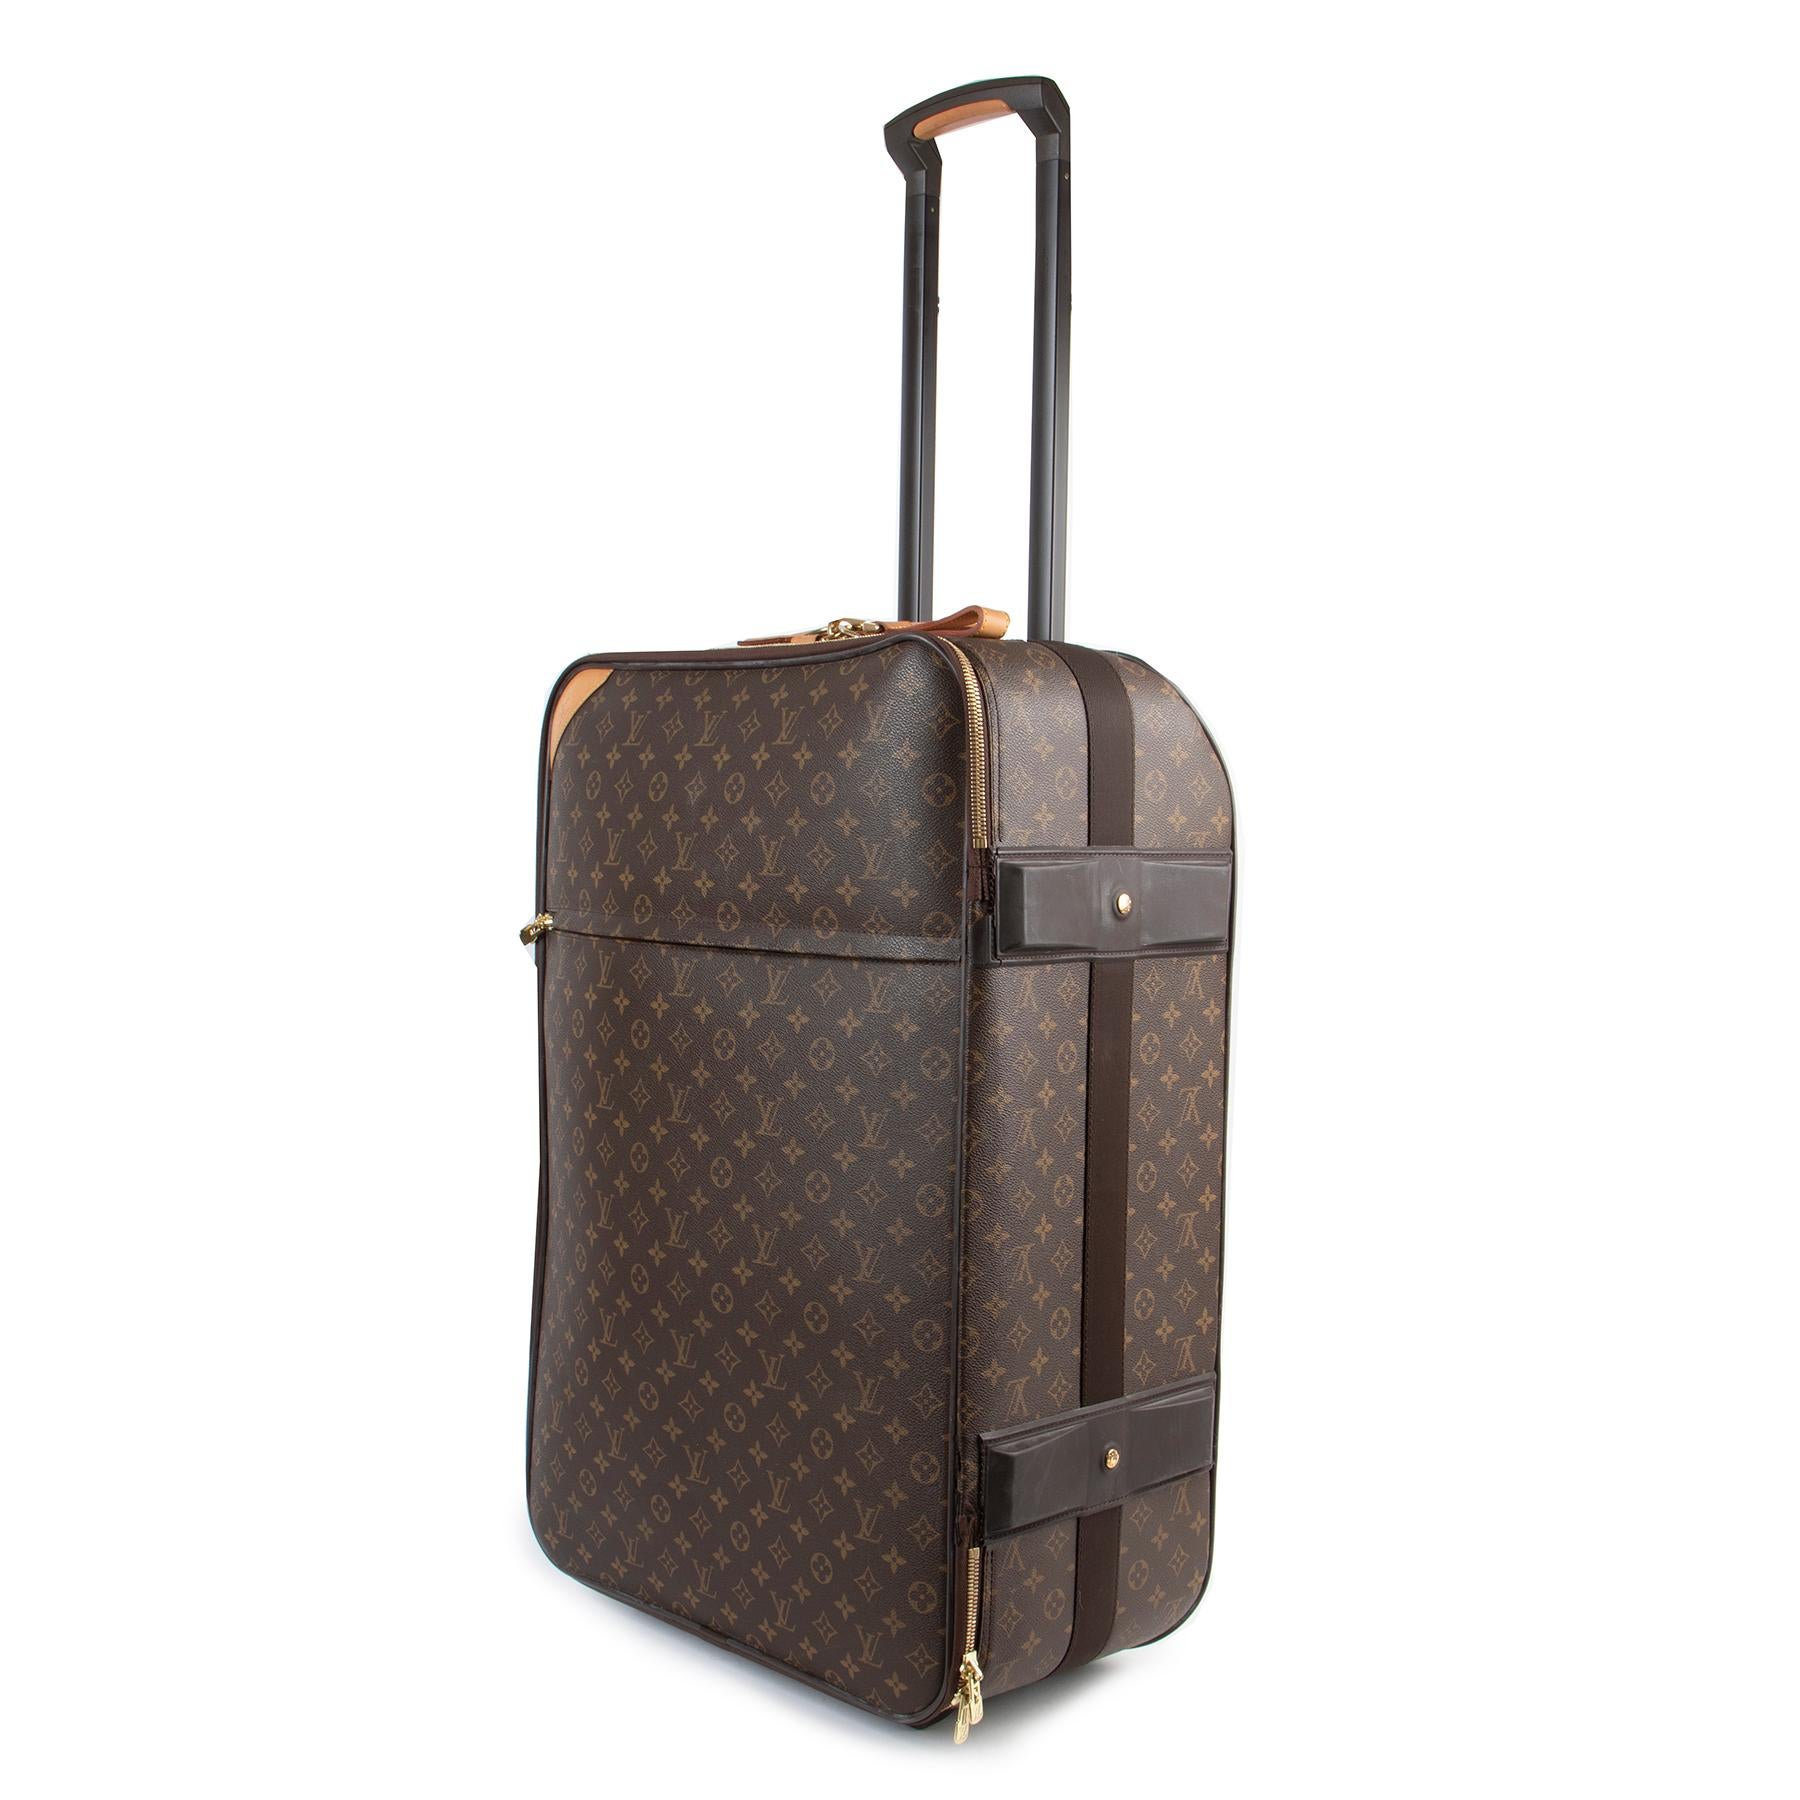 Louis Vuitton Pegase 65 Monogram Luggage Trolley

Travel in style with this stylish Louis Vuitton Pegase Trolley. This two-wheeled carry-on trolley features the brand's iconic Monogram and gold hardware details.

The interior consists of two